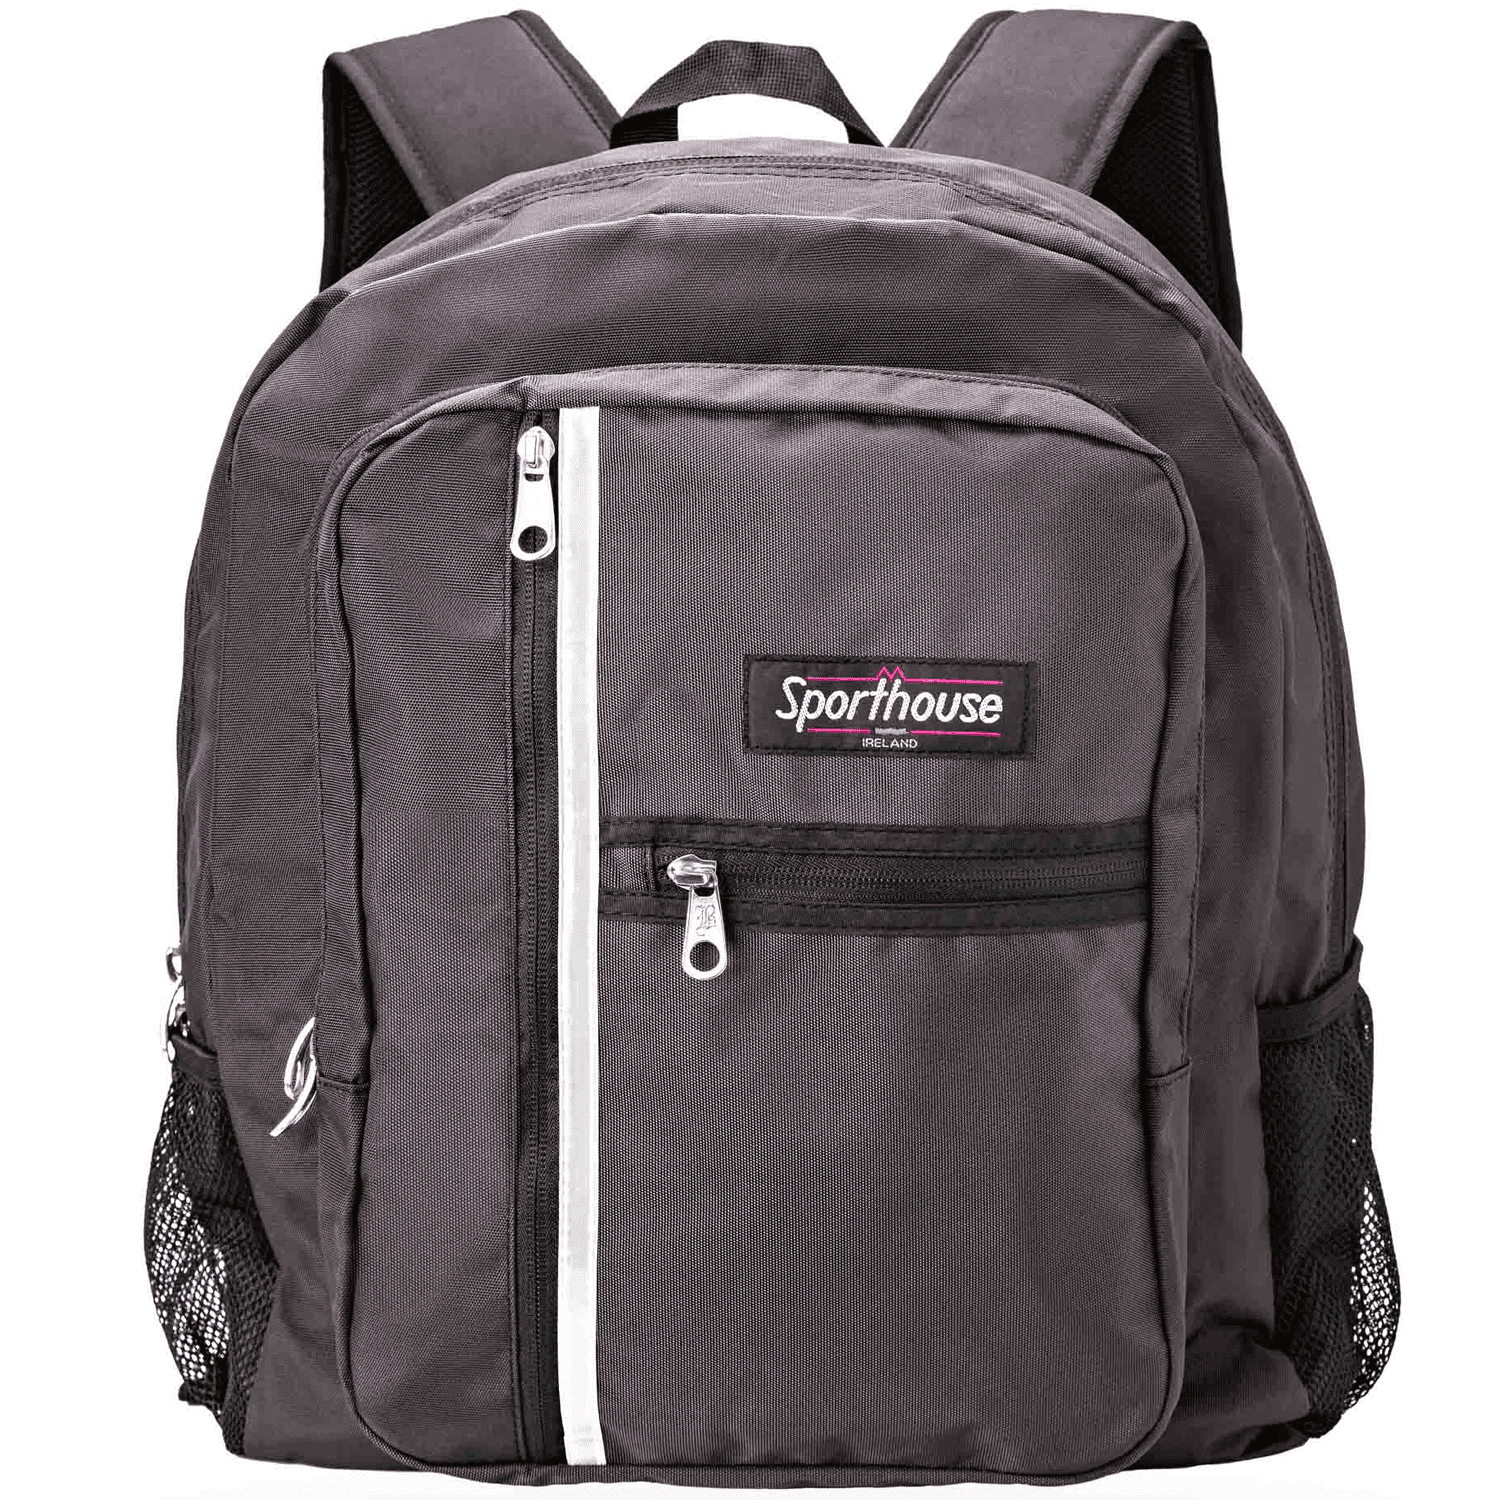 Sporthouse Student 2000 42L Backpack - Black/Grey 1 Shaws Department Stores